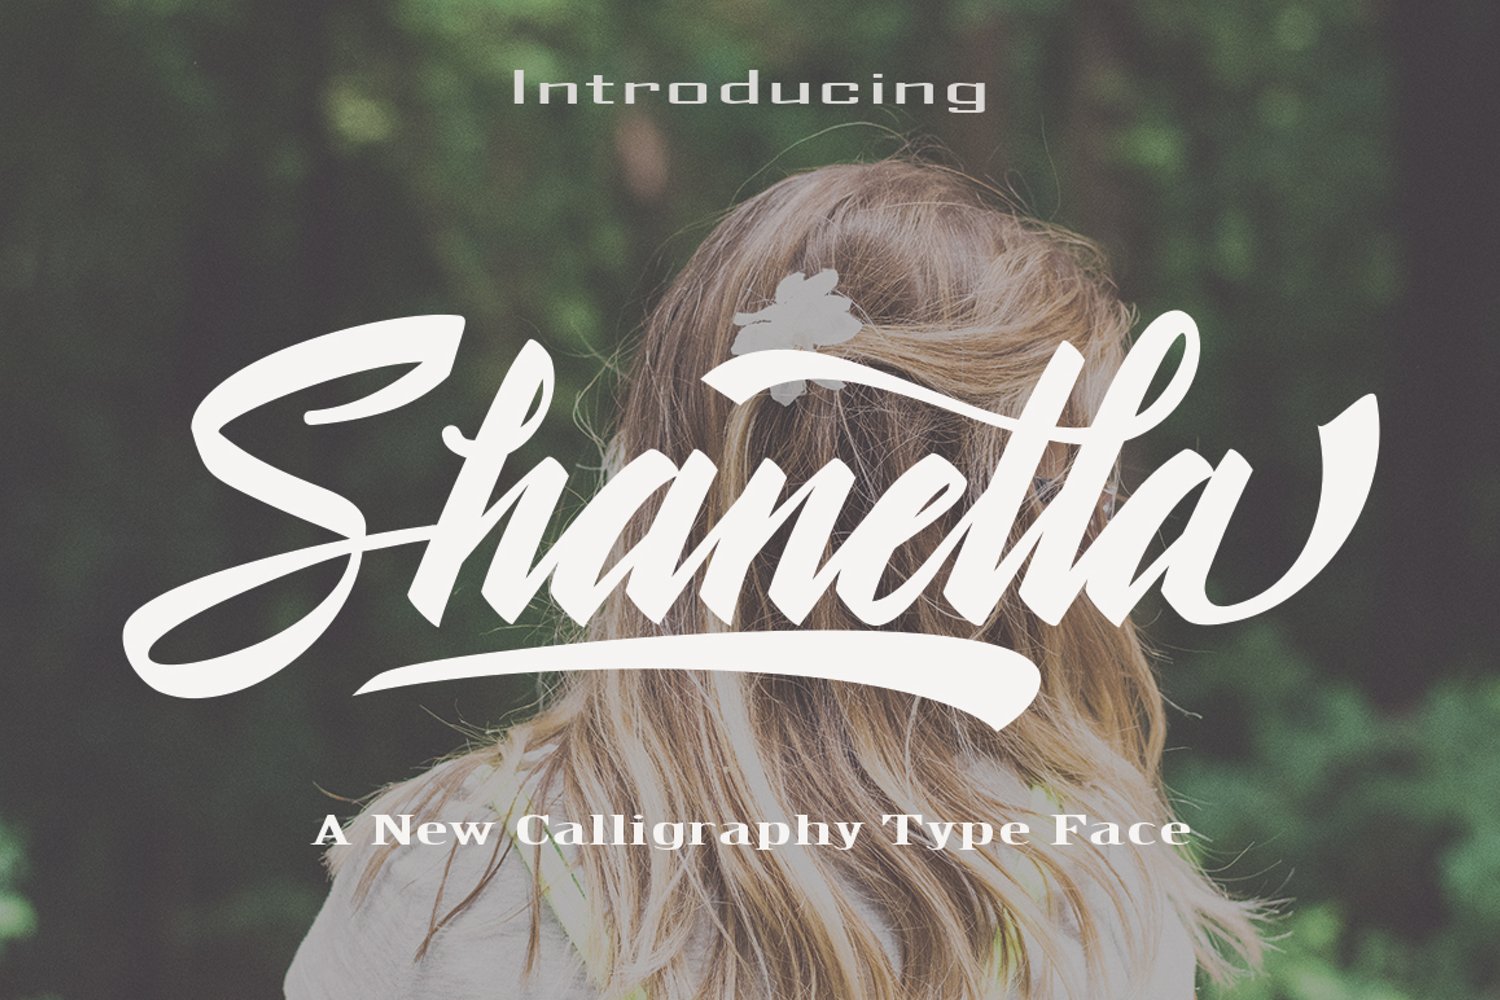 Cover image of Shanella font.